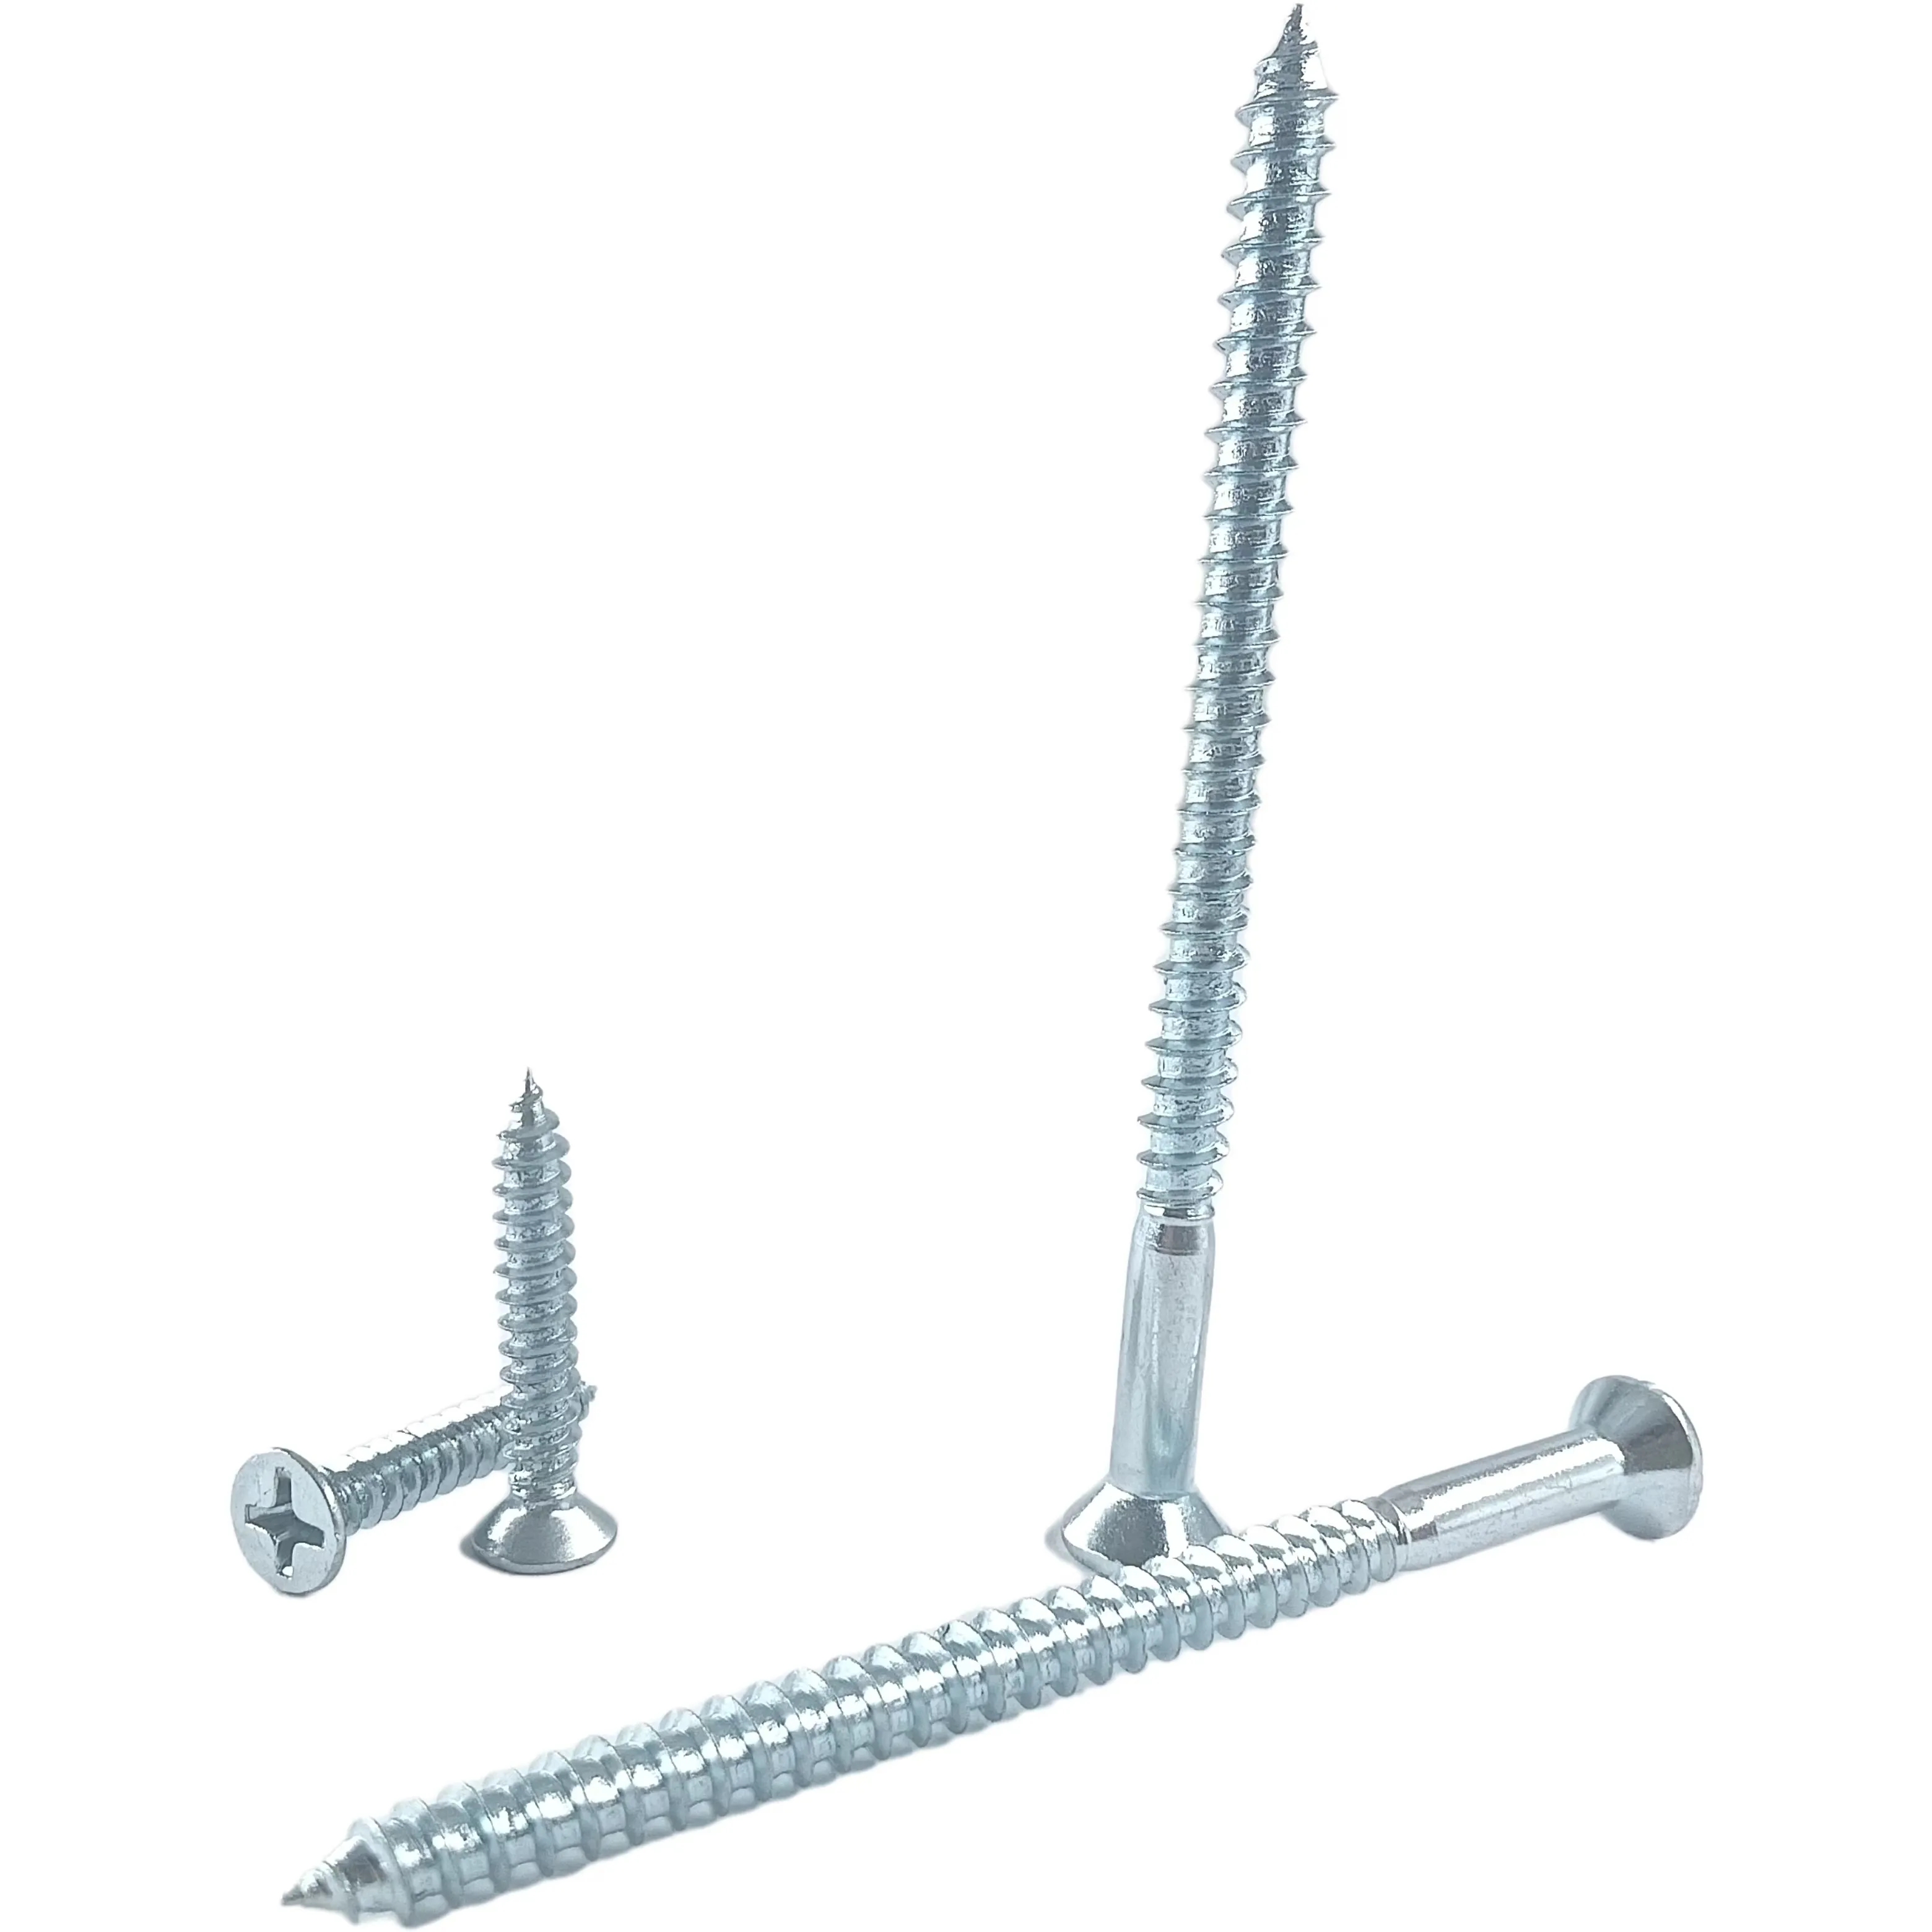 Stainless steel Deck Screws Wood Screws Zinc Plated Zinc Plated for Outdoor Wood Fence